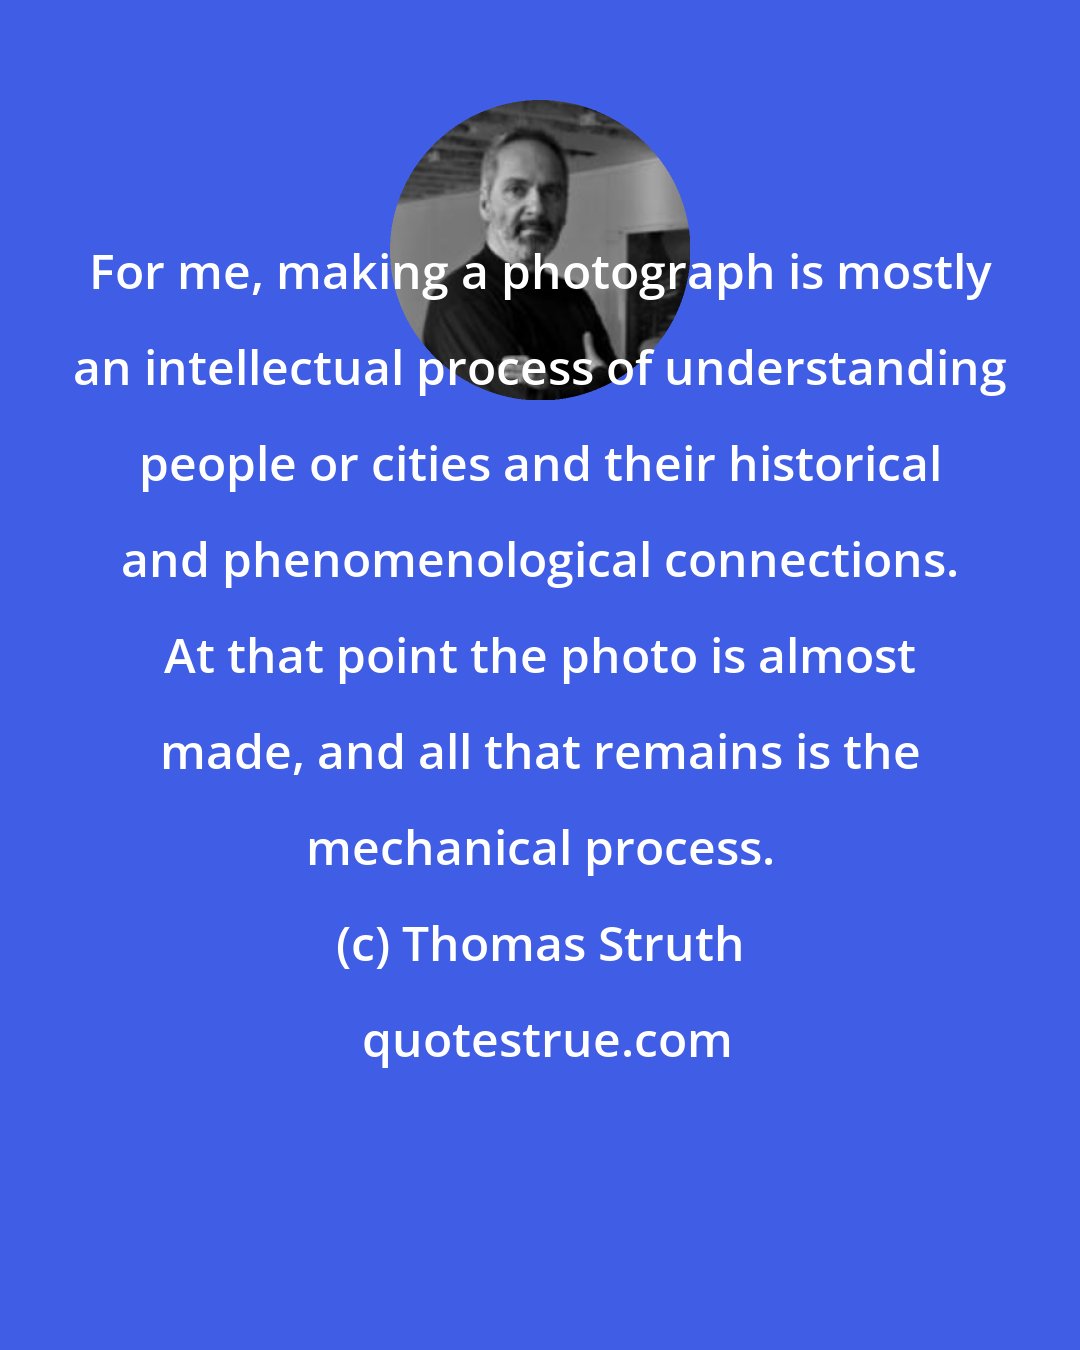 Thomas Struth: For me, making a photograph is mostly an intellectual process of understanding people or cities and their historical and phenomenological connections. At that point the photo is almost made, and all that remains is the mechanical process.